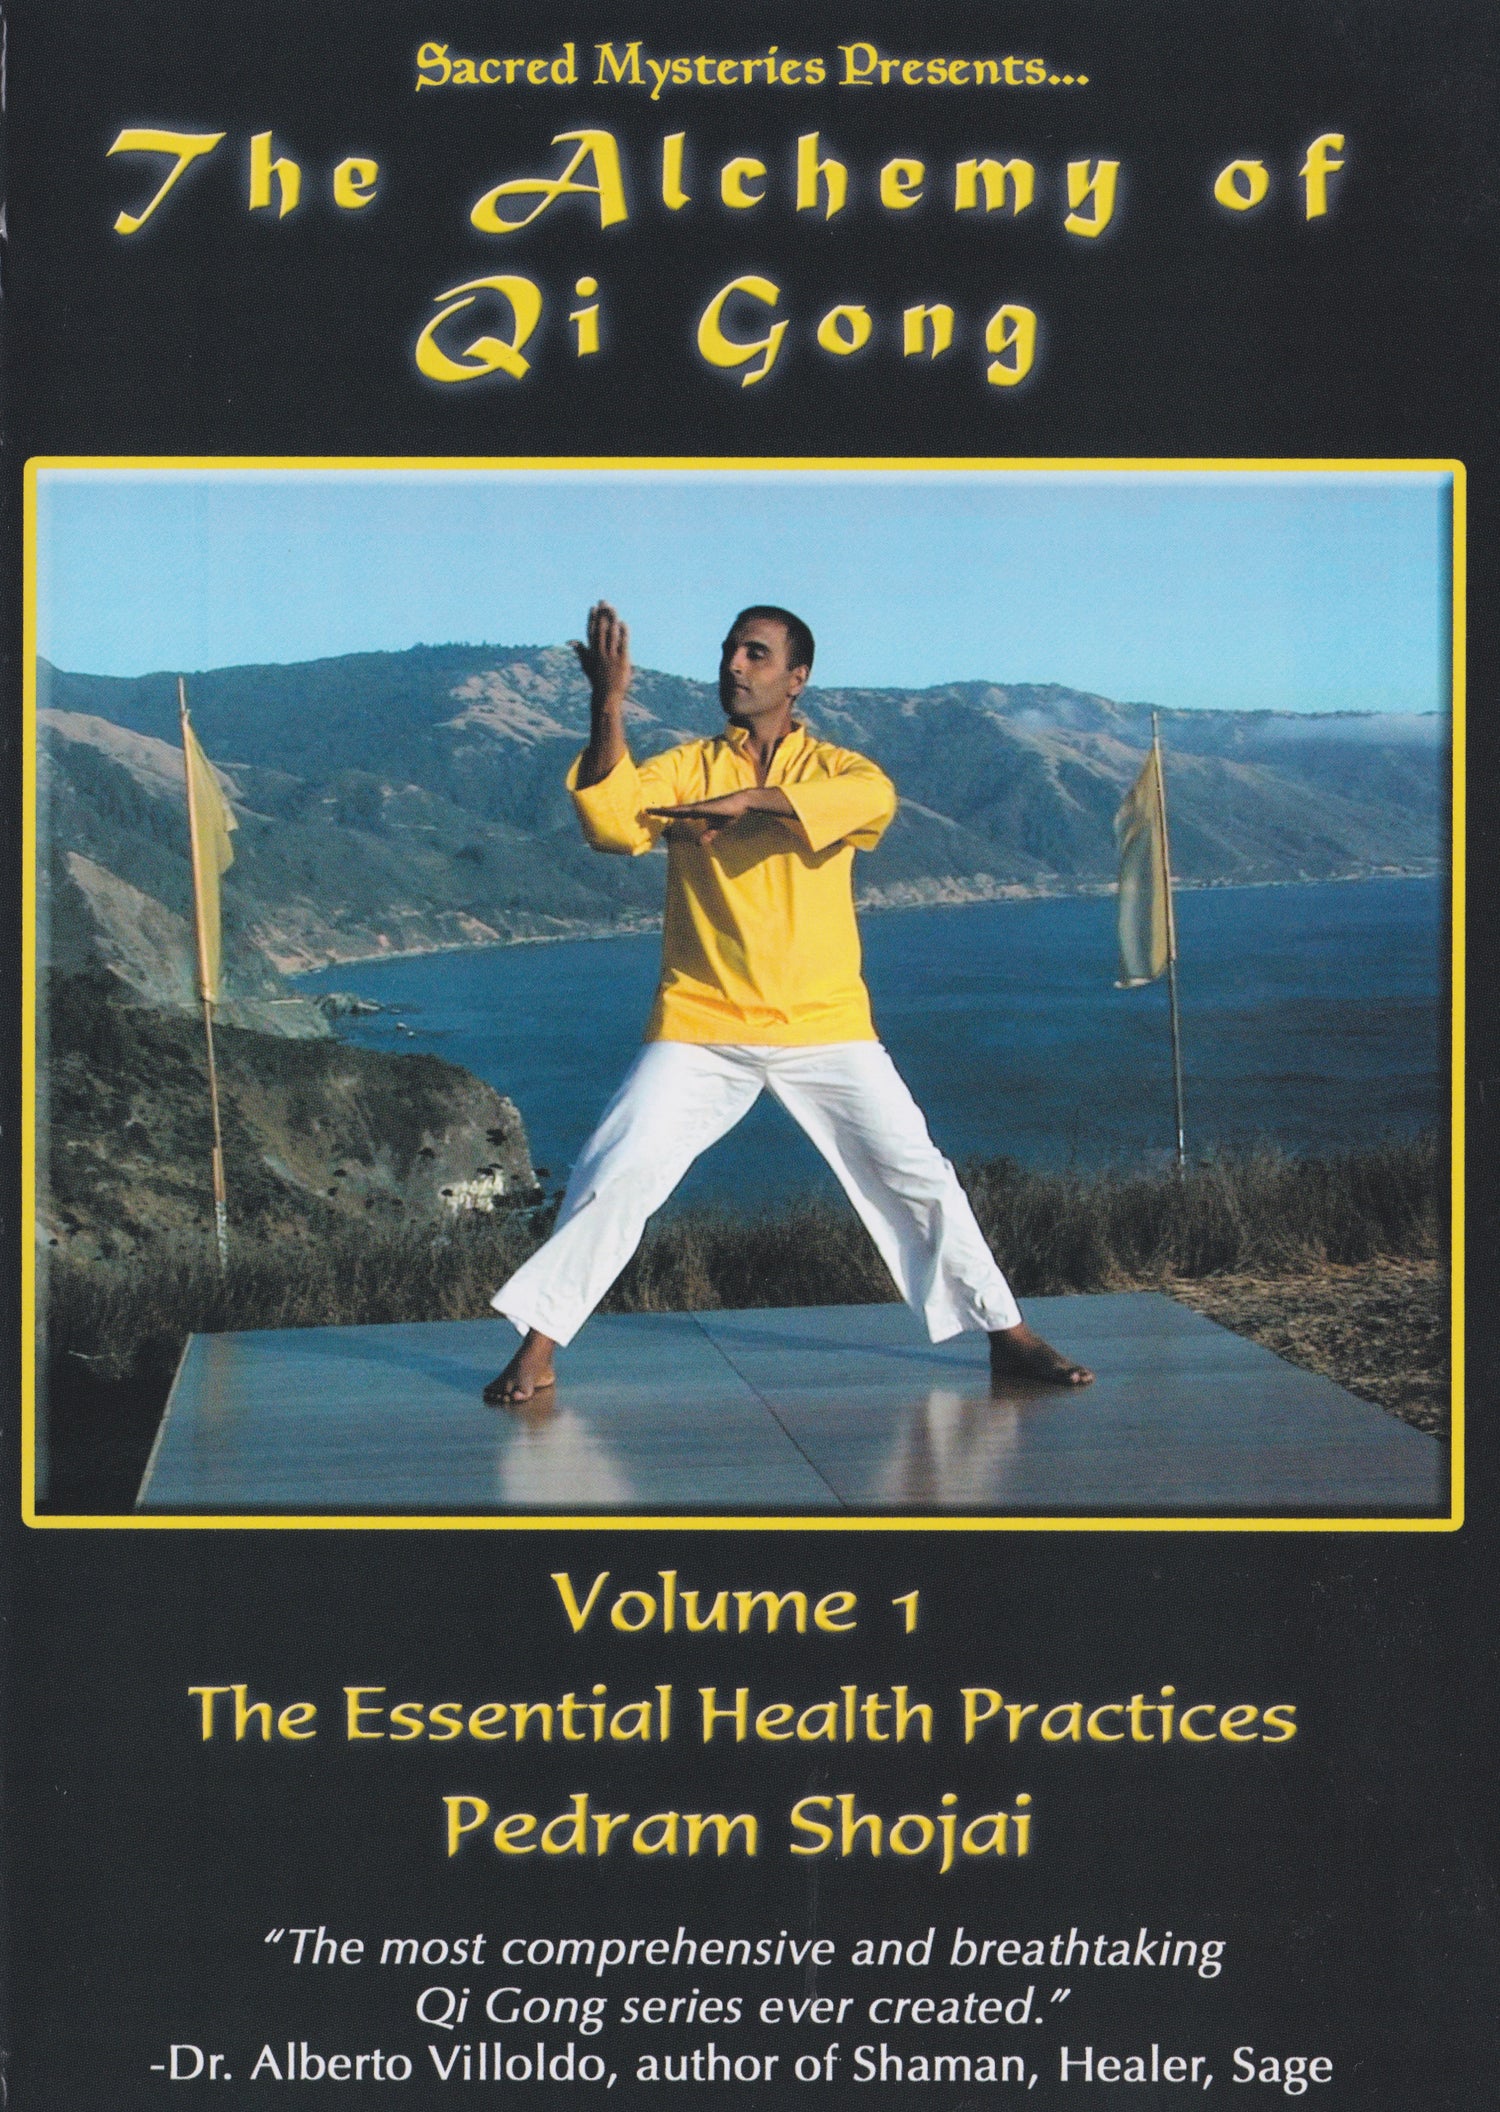 The Alchemy Of Qigong With Pedram Shojai DVD 1 Essential Health Practice (Preowned)